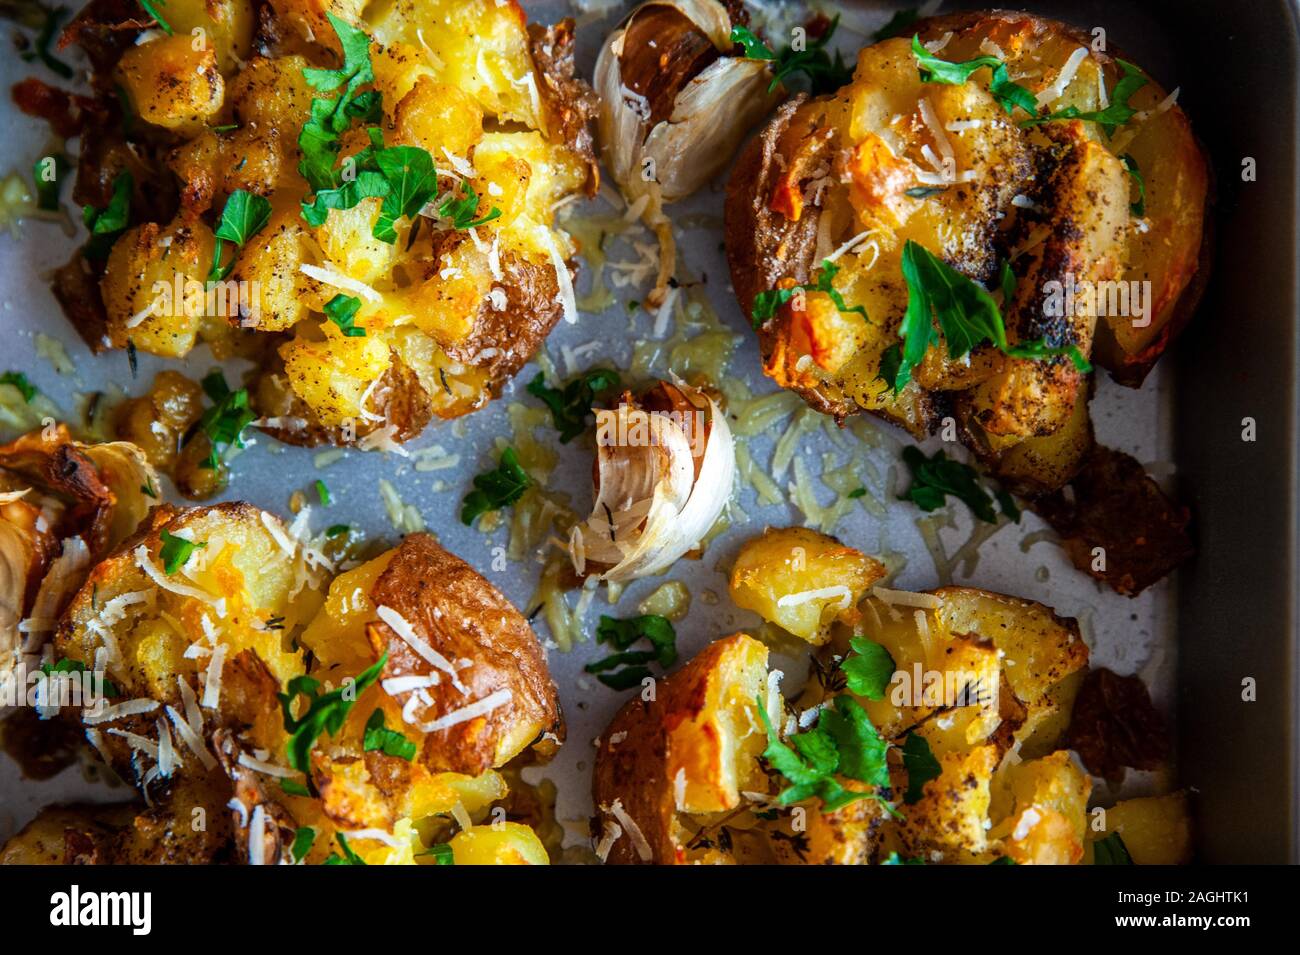 Close up shot of the roasted potatoes in a oven tray with garlic and herbs Stock Photo